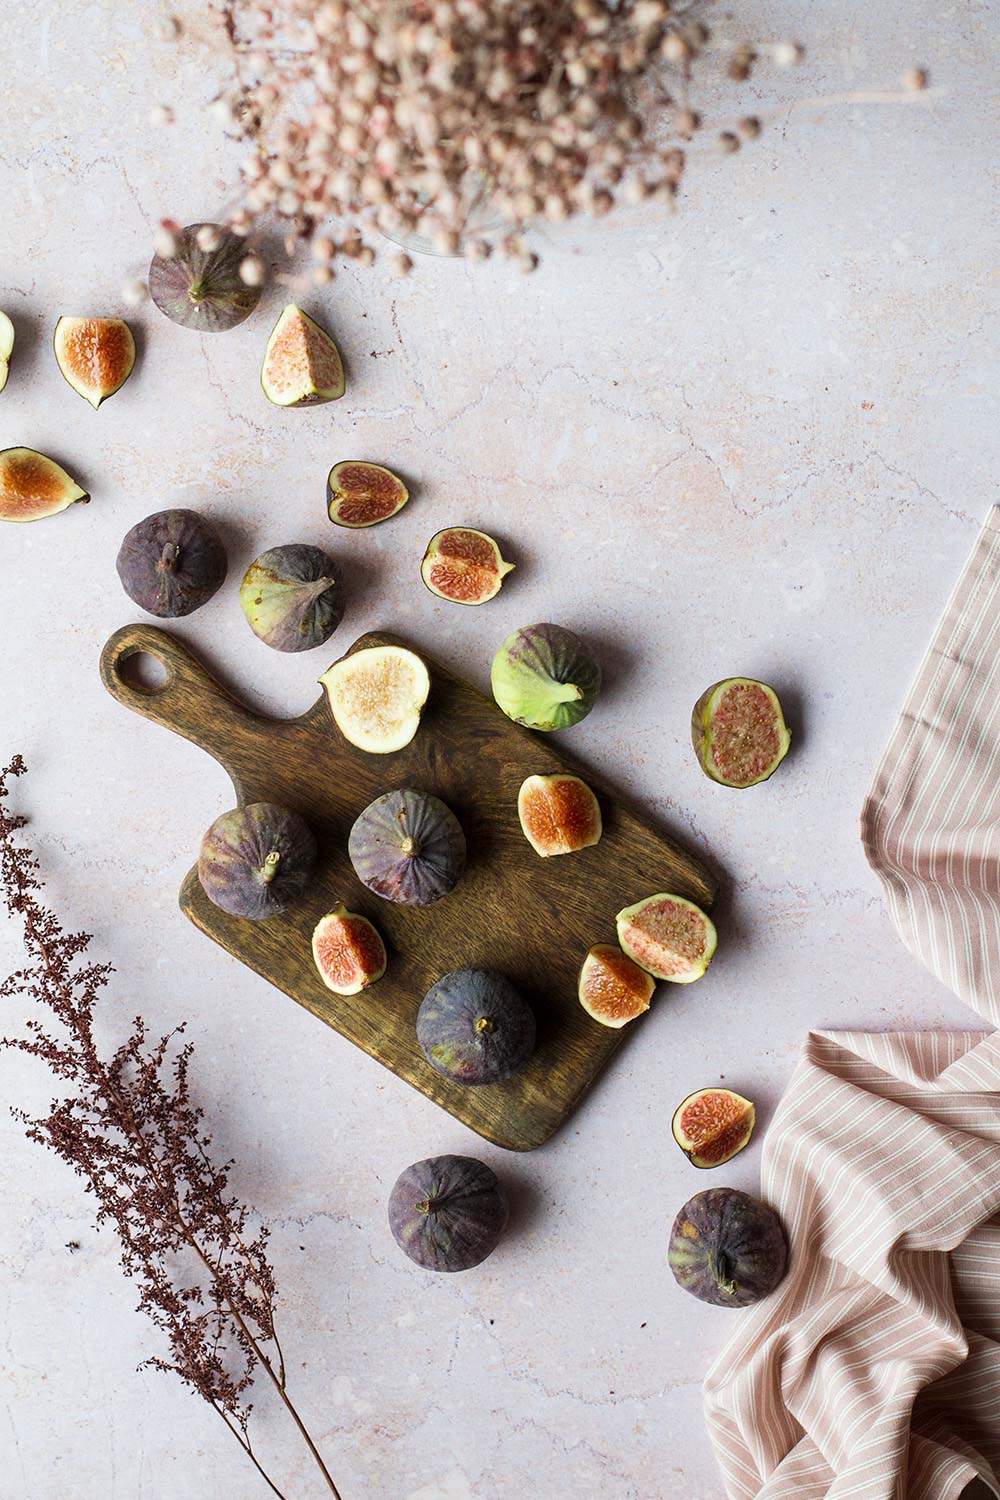 Whole and cut figs on a wooden cutting board. Purple-ish background.